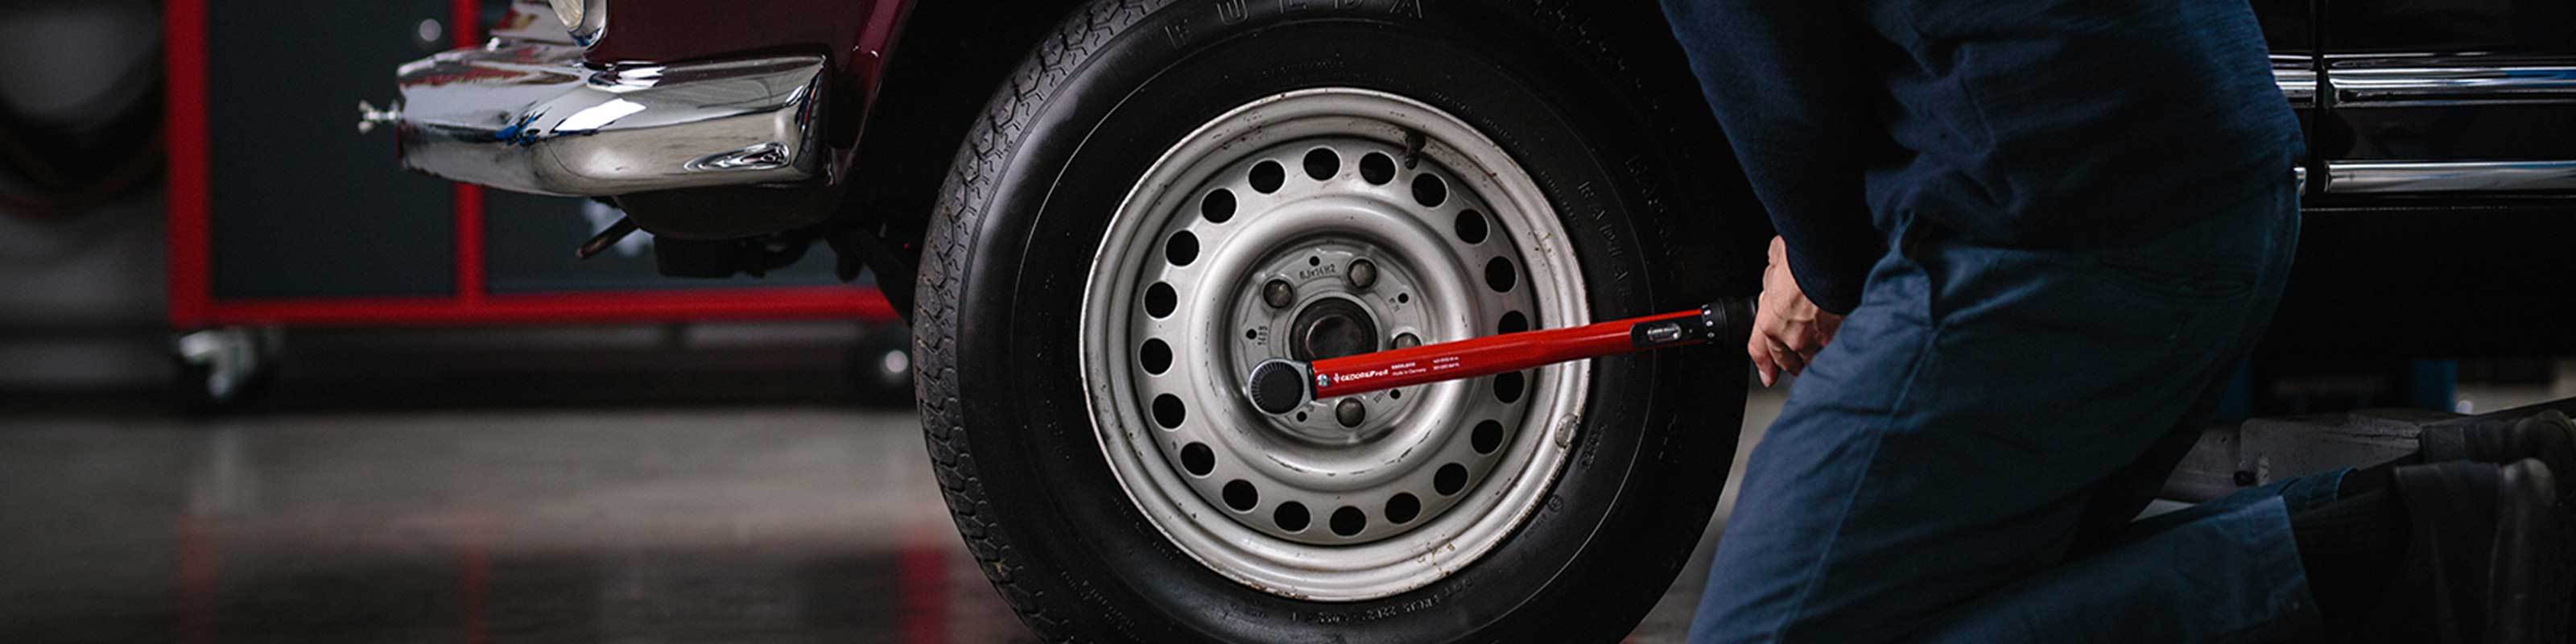 GEDOREred_Torque-Wrench_40-200Nm_Tyre-Change_3200x800